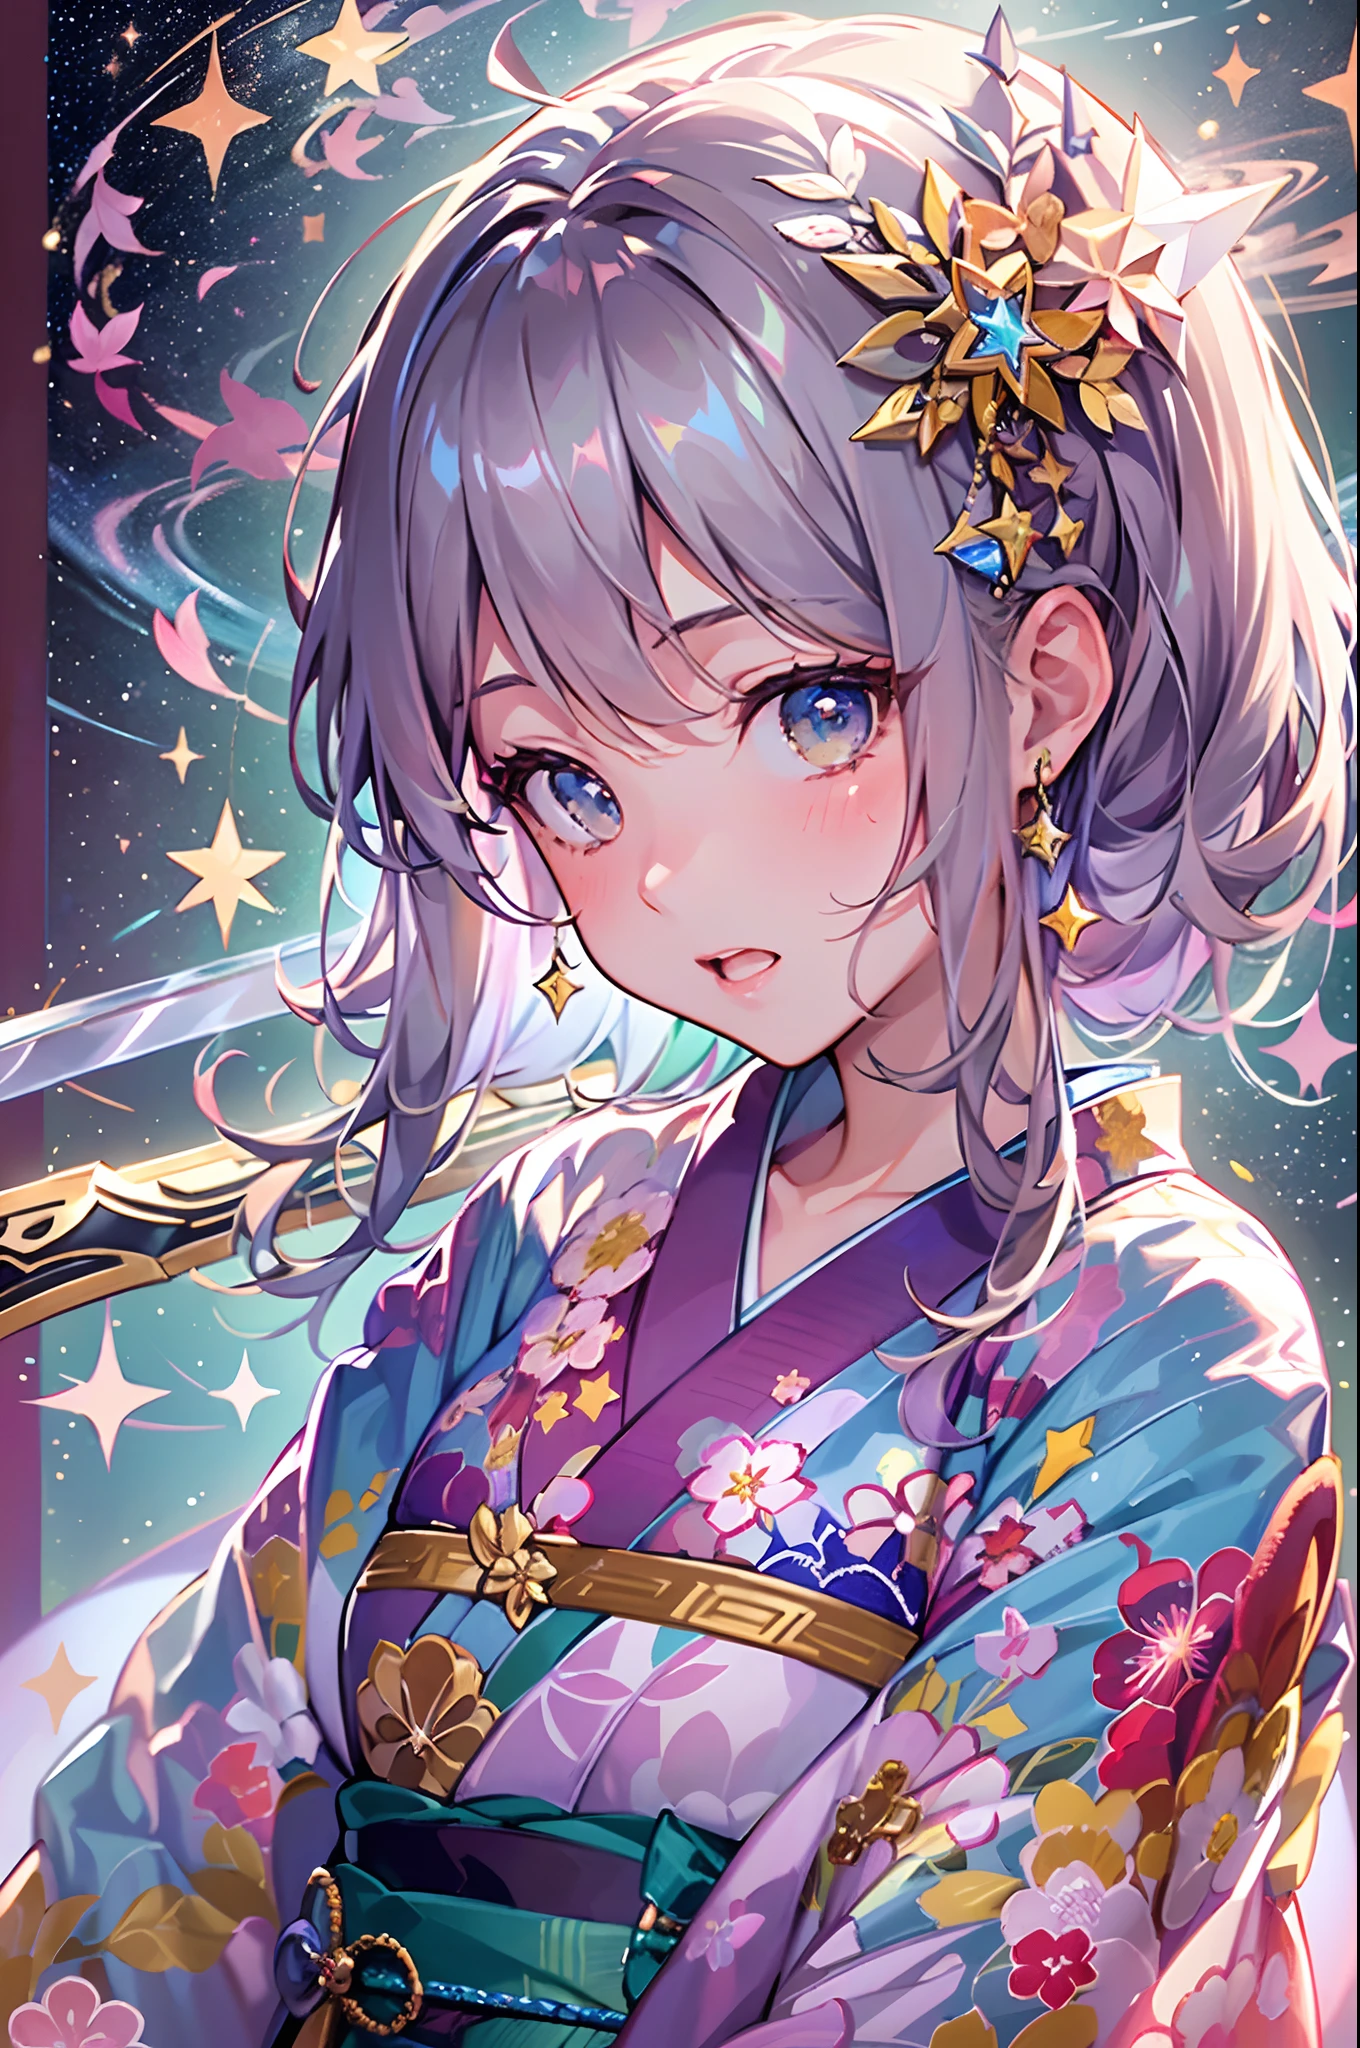 top-quality、Top image quality、​masterpiece、girl with、Beautifully shining stars々Glowing cosmic background、Girl in gorgeous Japanese-style kimono、(Standing with a large shining sword)、Fantastic and beautiful